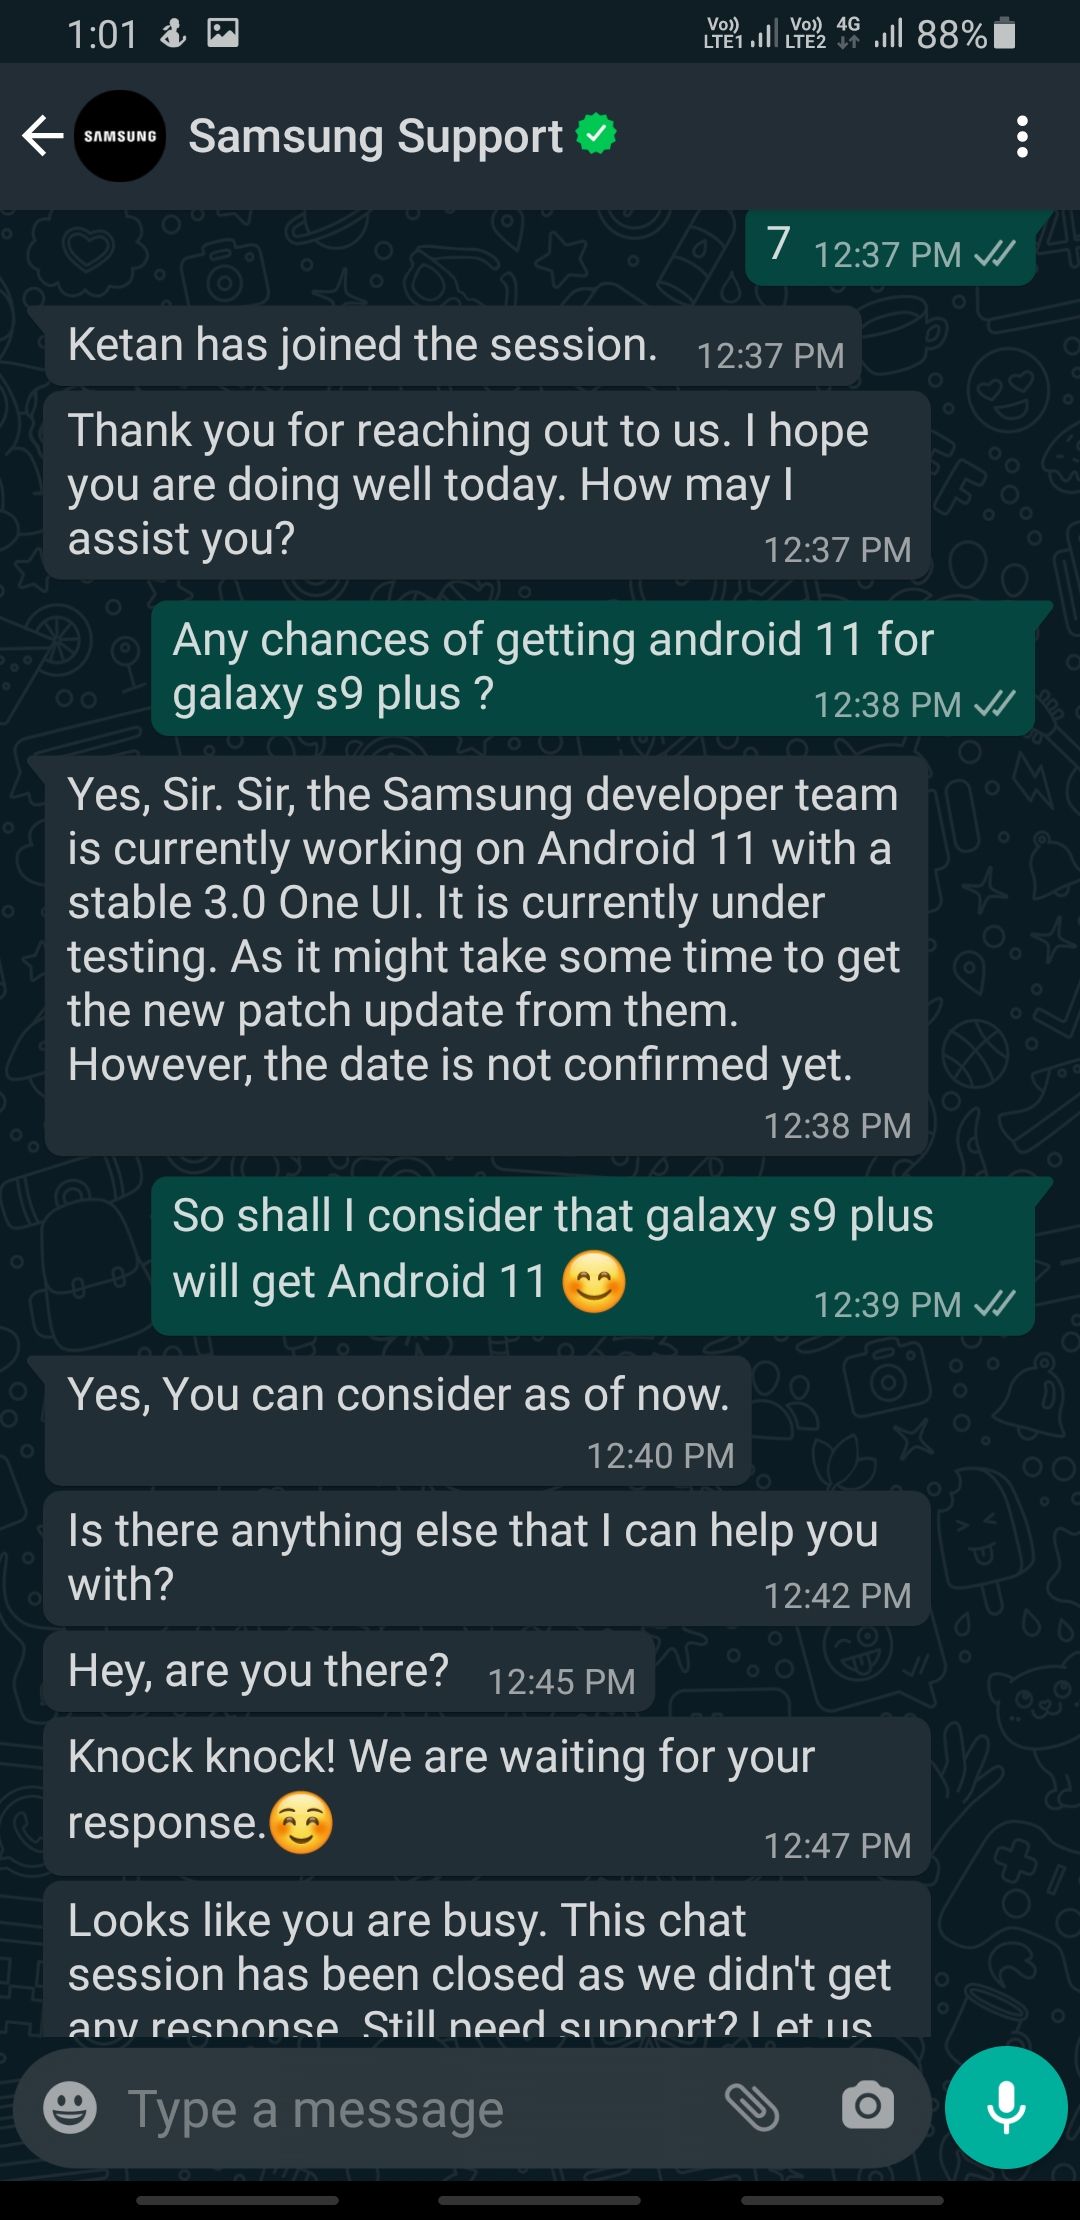 S9 plus is getting Android 11 with one UI - Samsung Members